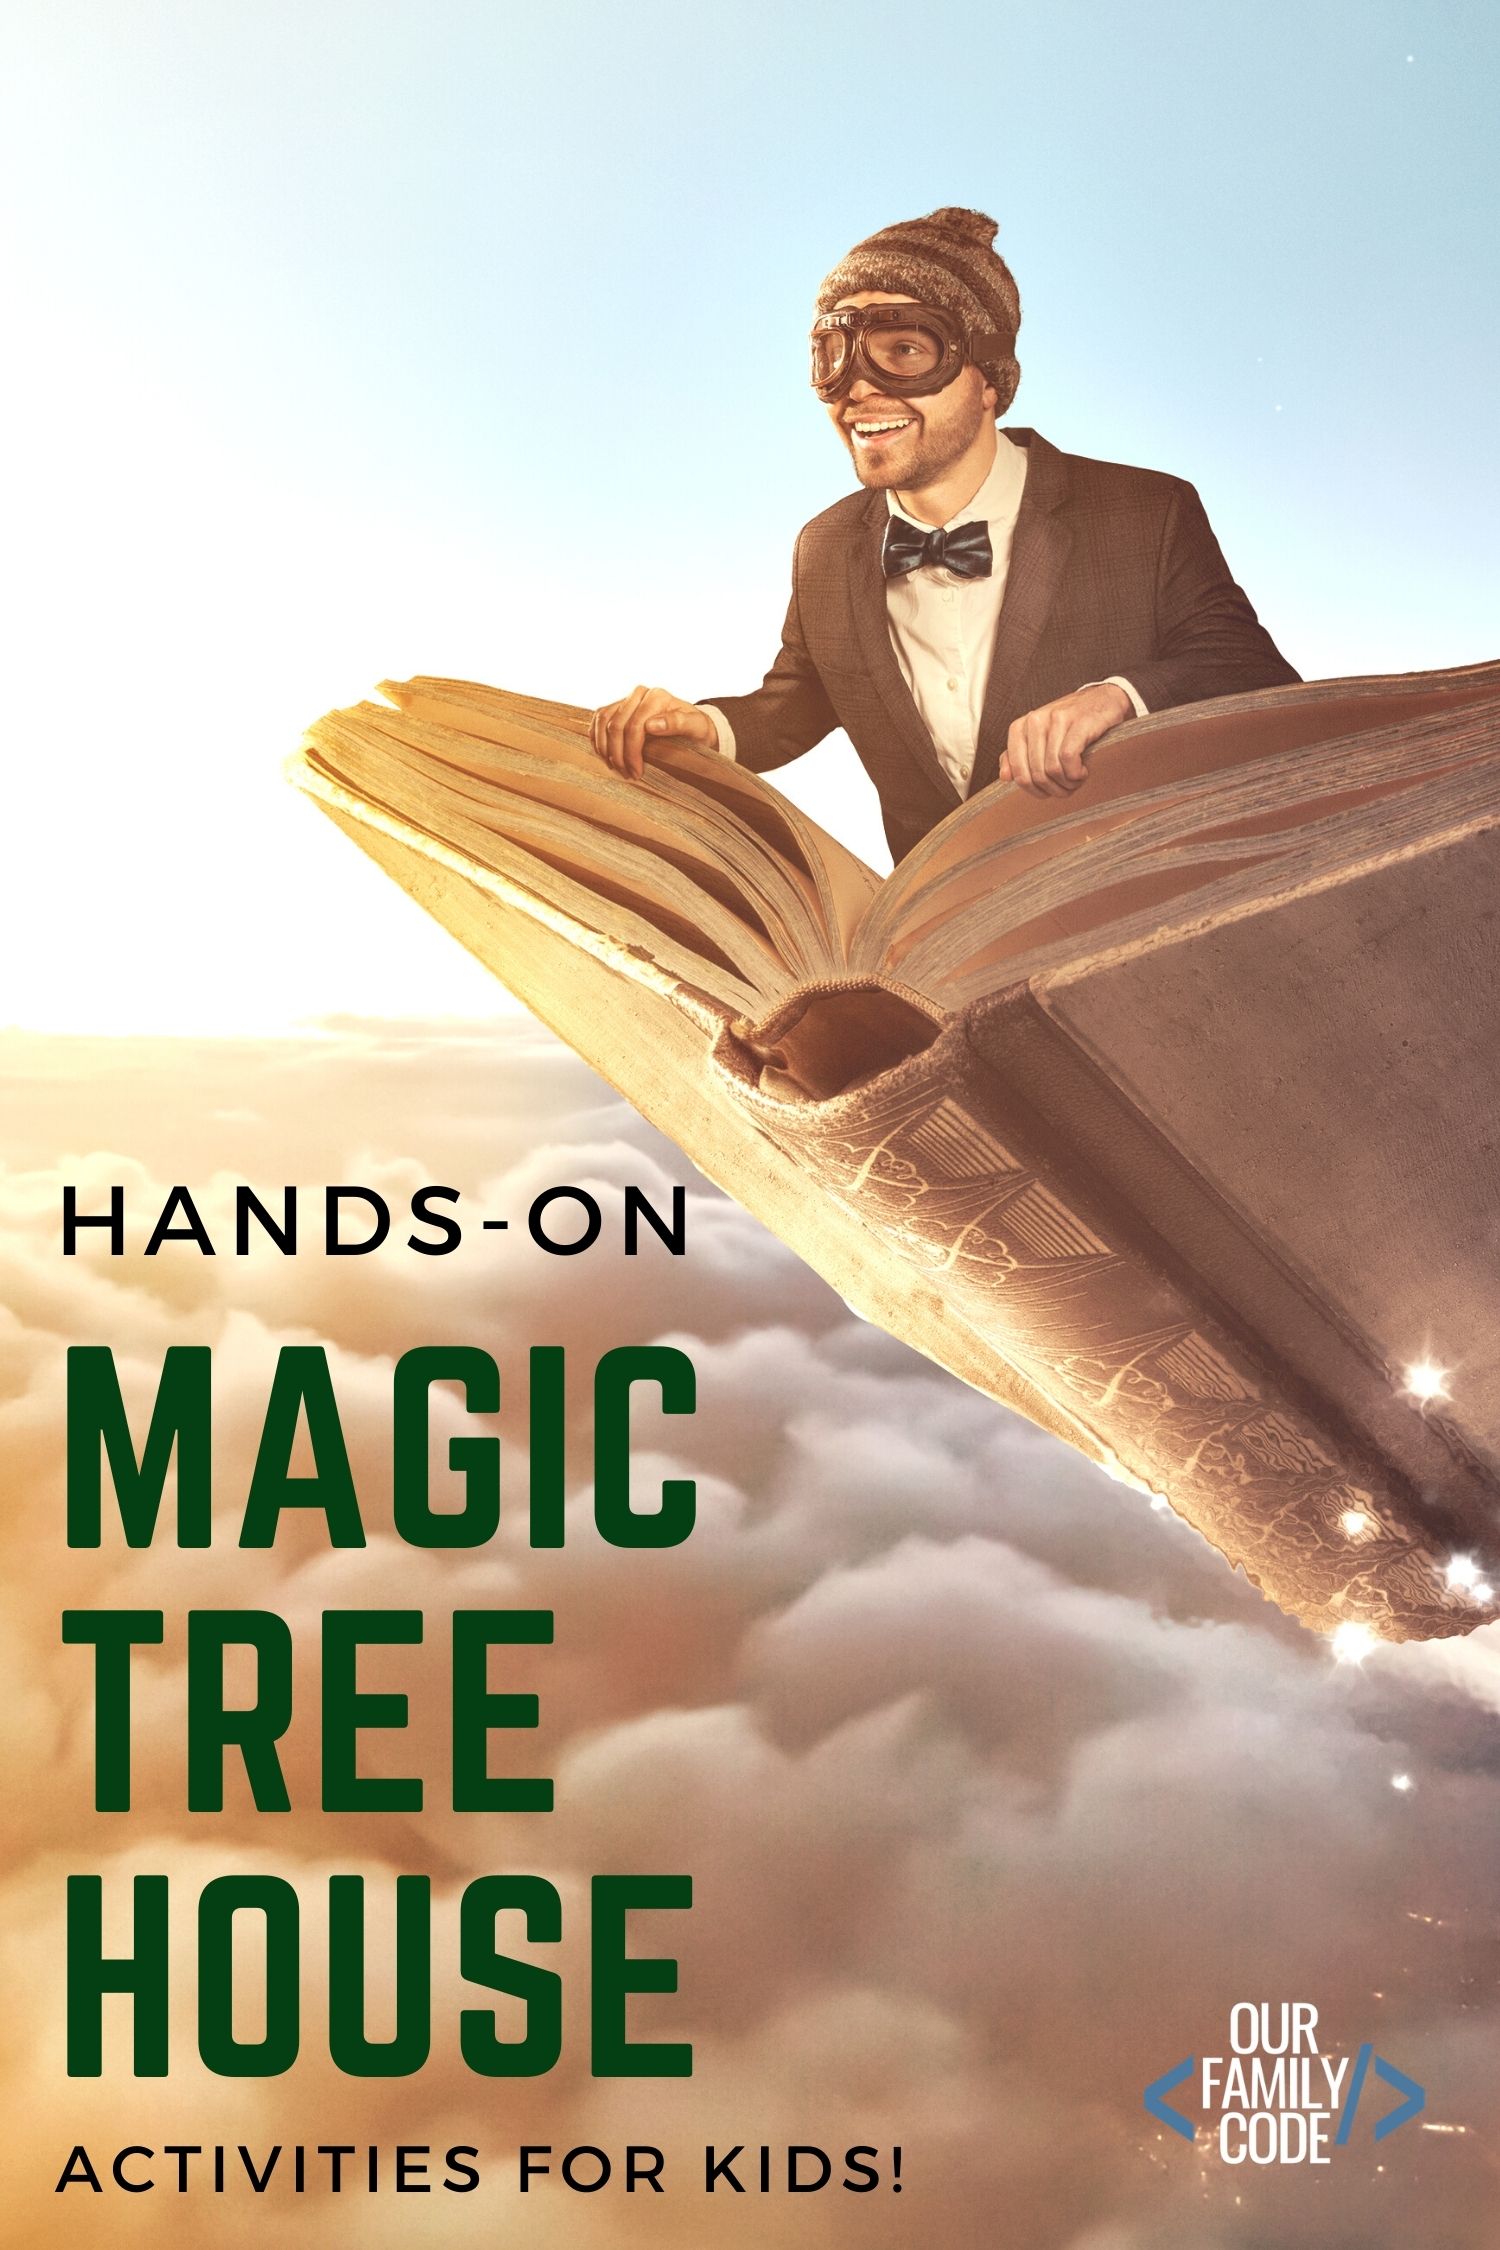 Hands on Magic Tree House Book Activities STEAM STEM